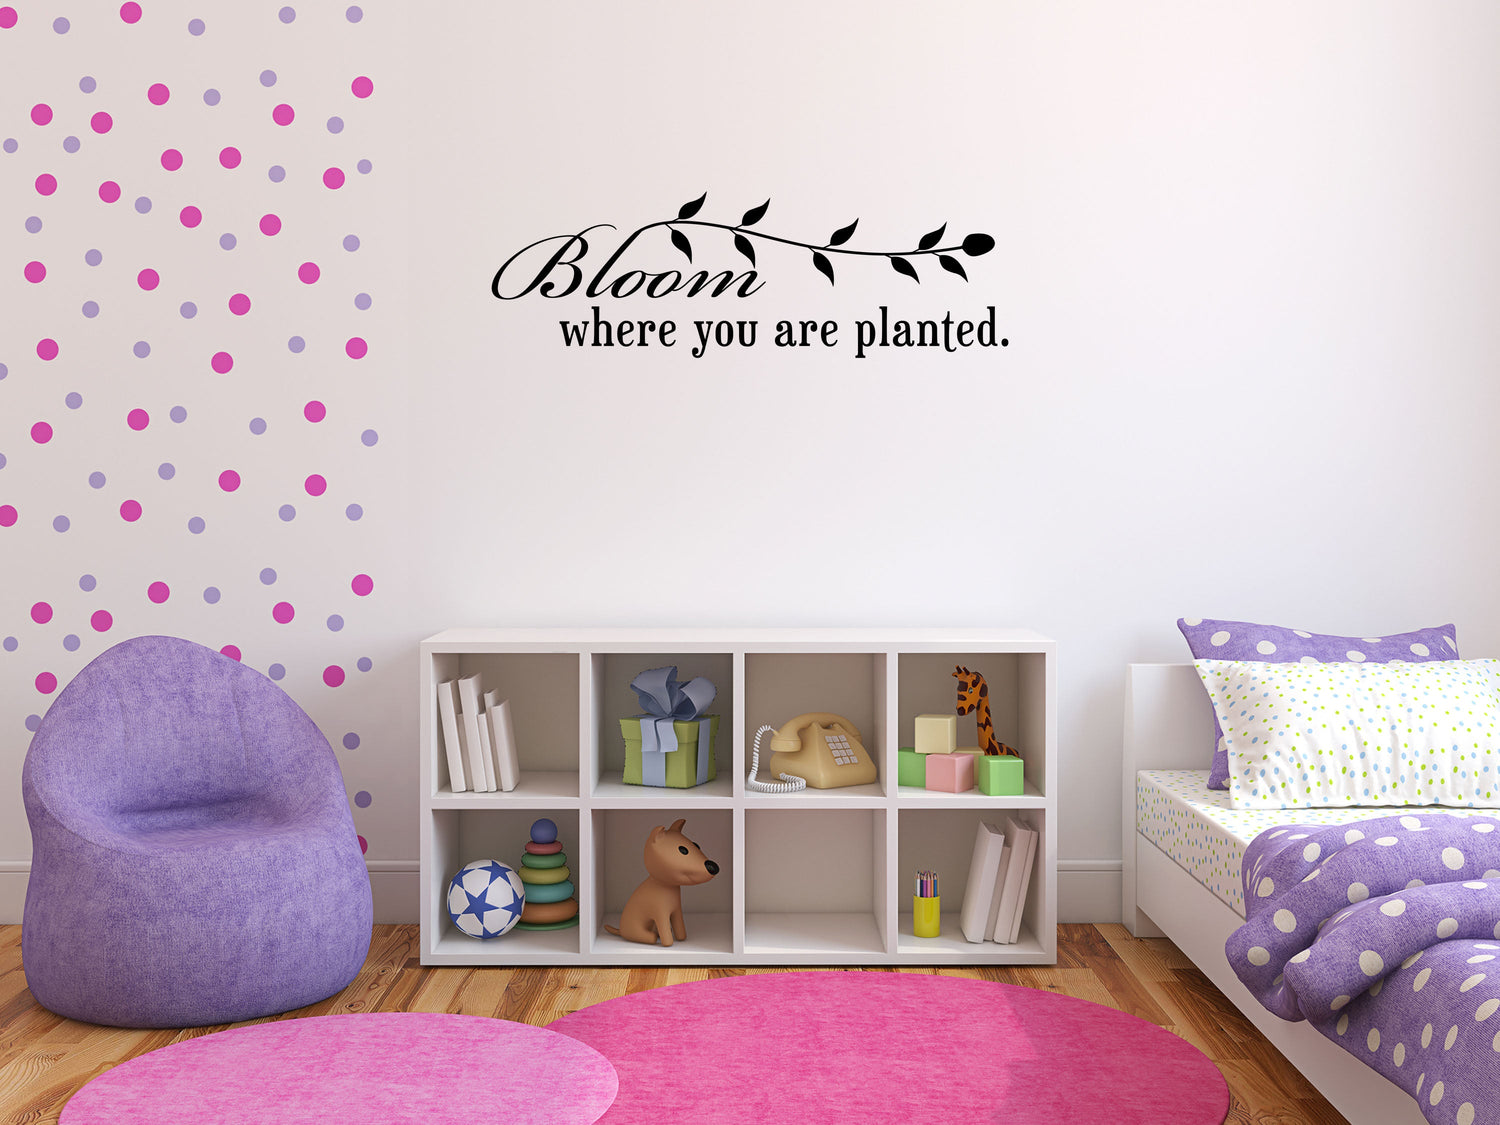 Bloom Where You Are Planted Wall Vinyl Wall Lettering - Wall